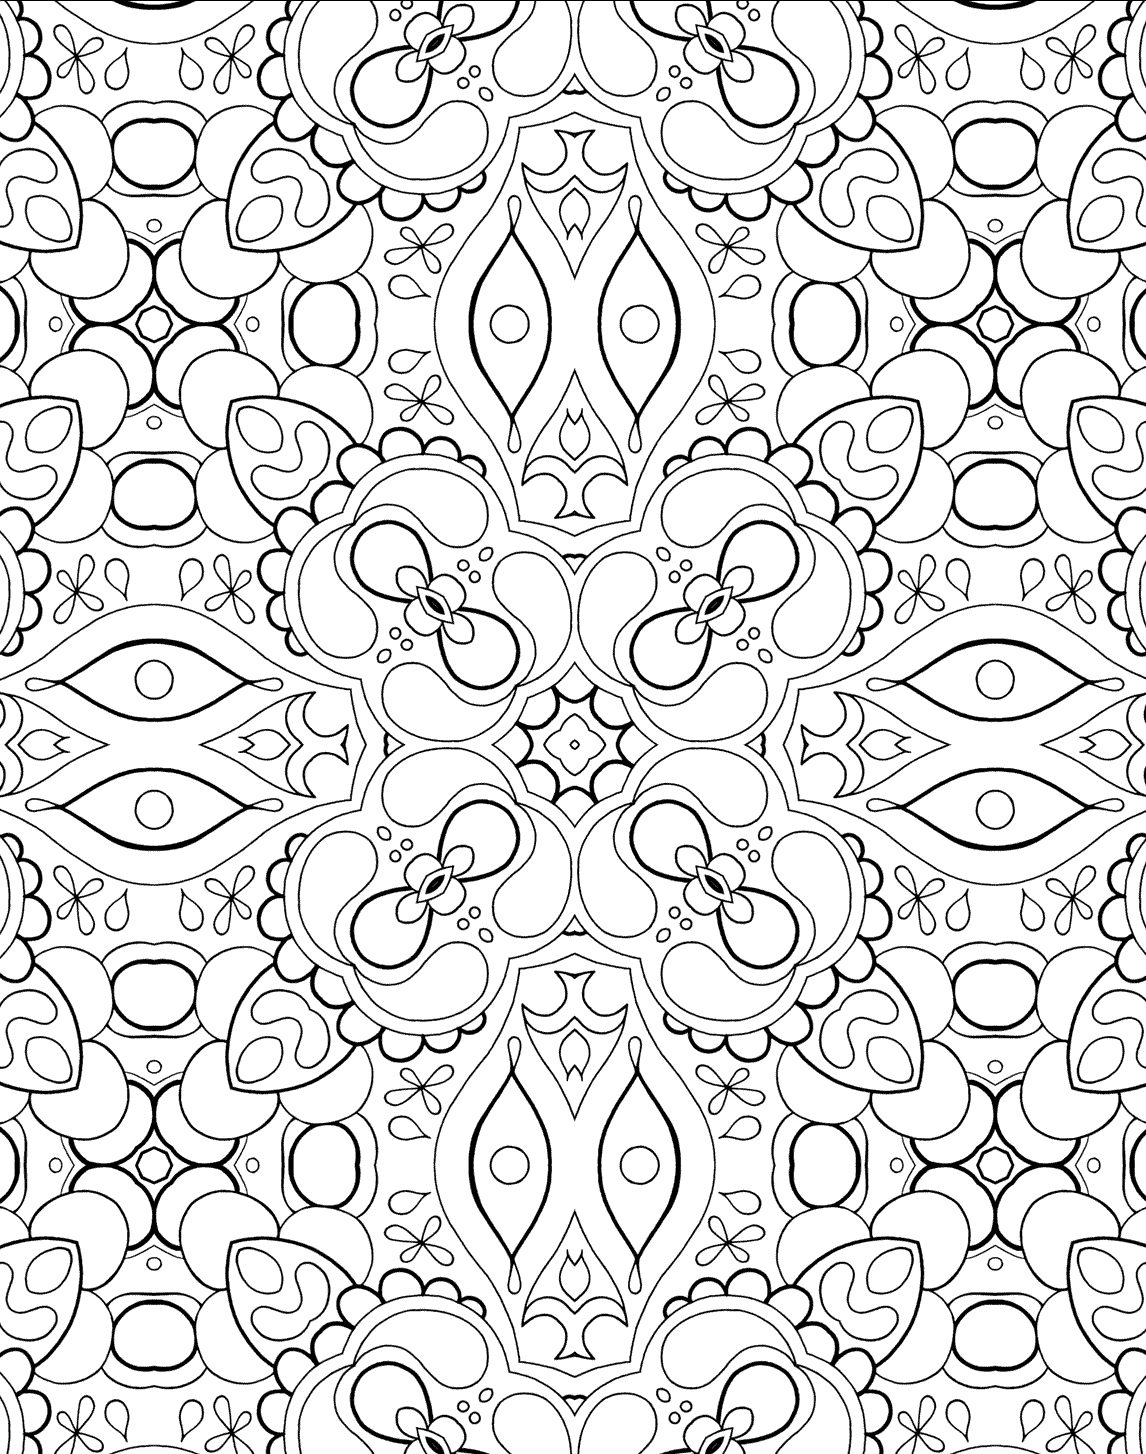 mindfulness colouring pages mindfulness coloring pages best coloring pages for kids colouring pages mindfulness 